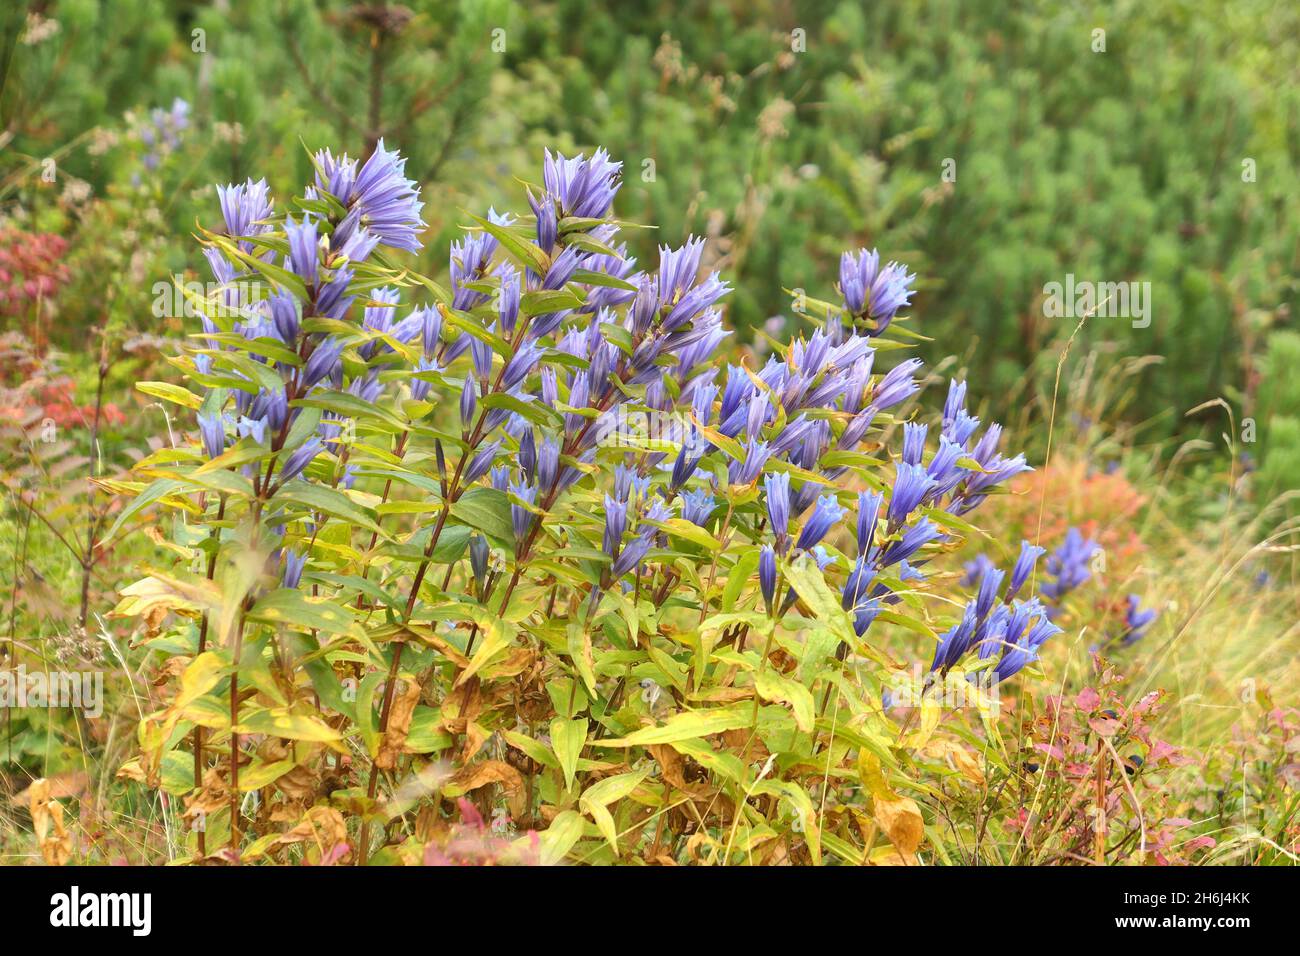 The willow gentian flowers, Gentiana asclepiadea in Tatra mountains, Poland. Stock Photo